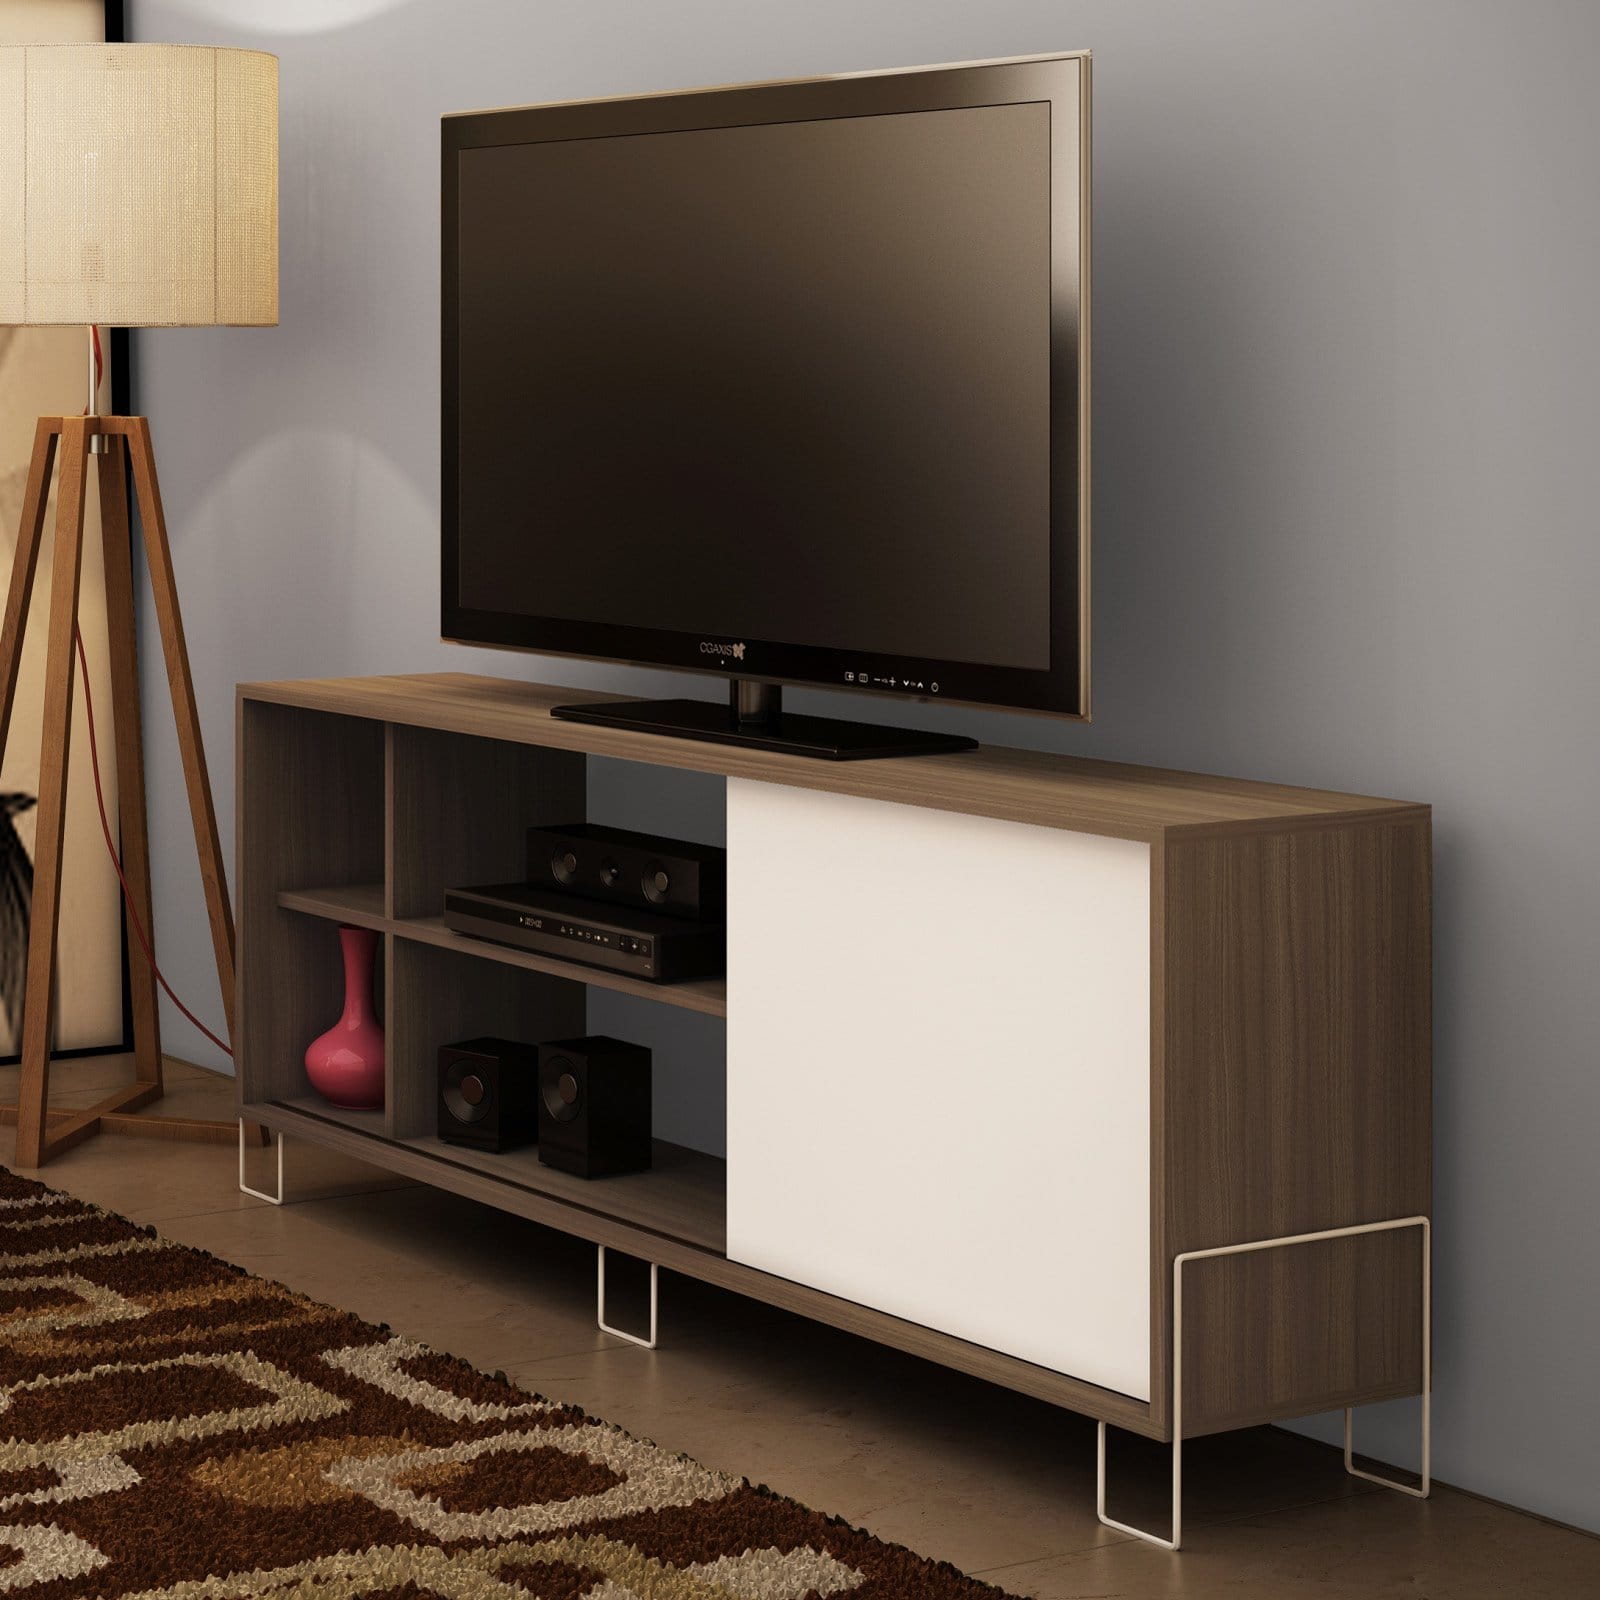 Nacka TV Stand 2.0 with 4 shelves in Oak and White - image 4 of 10